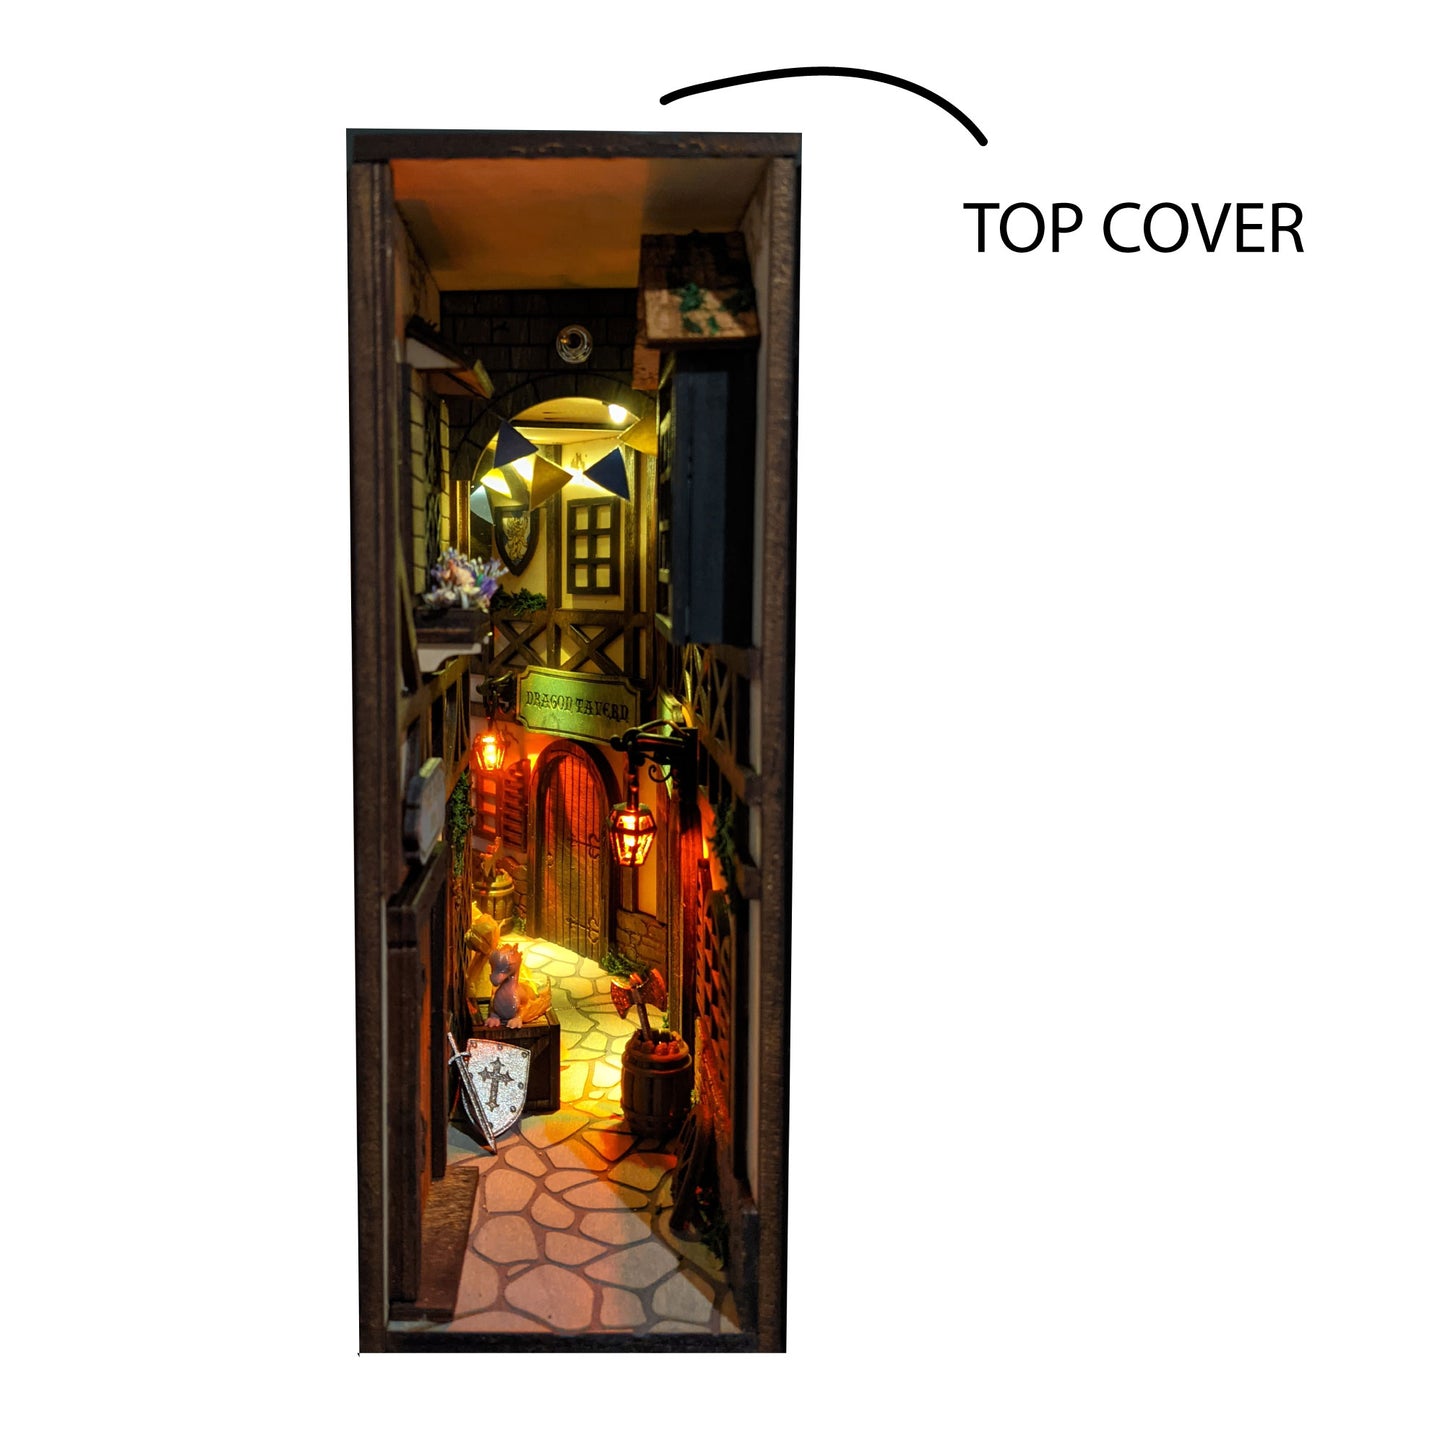 Top Cover